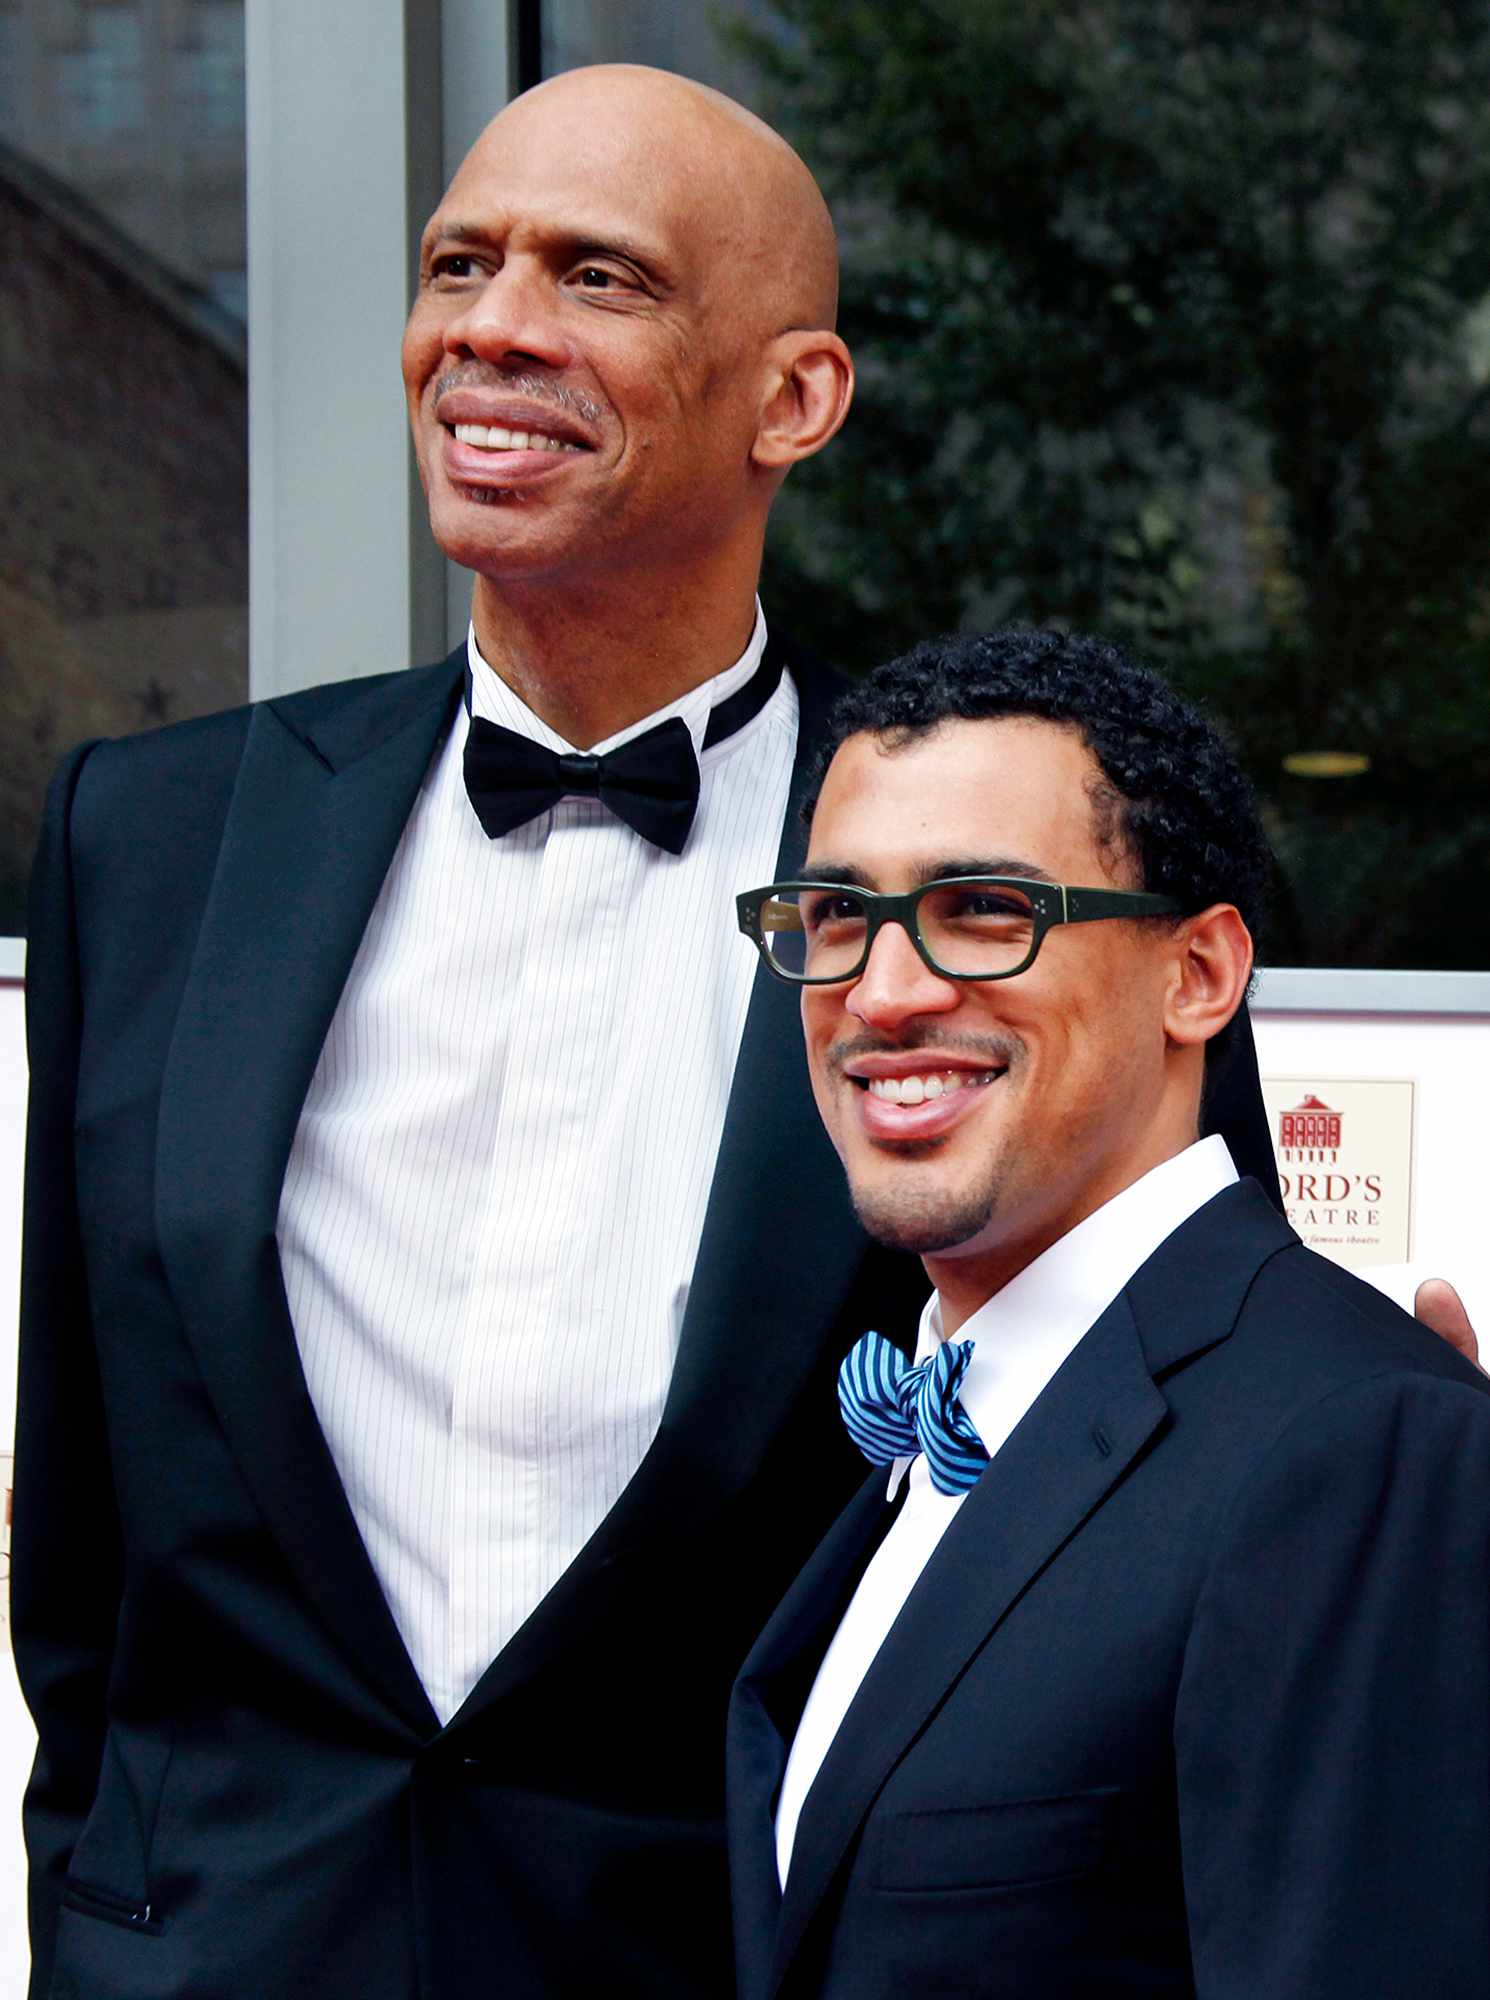 Kareem Abdul-Jabbar with his son Amir on the red carpet at the Ford's Theatre Annual Gala 